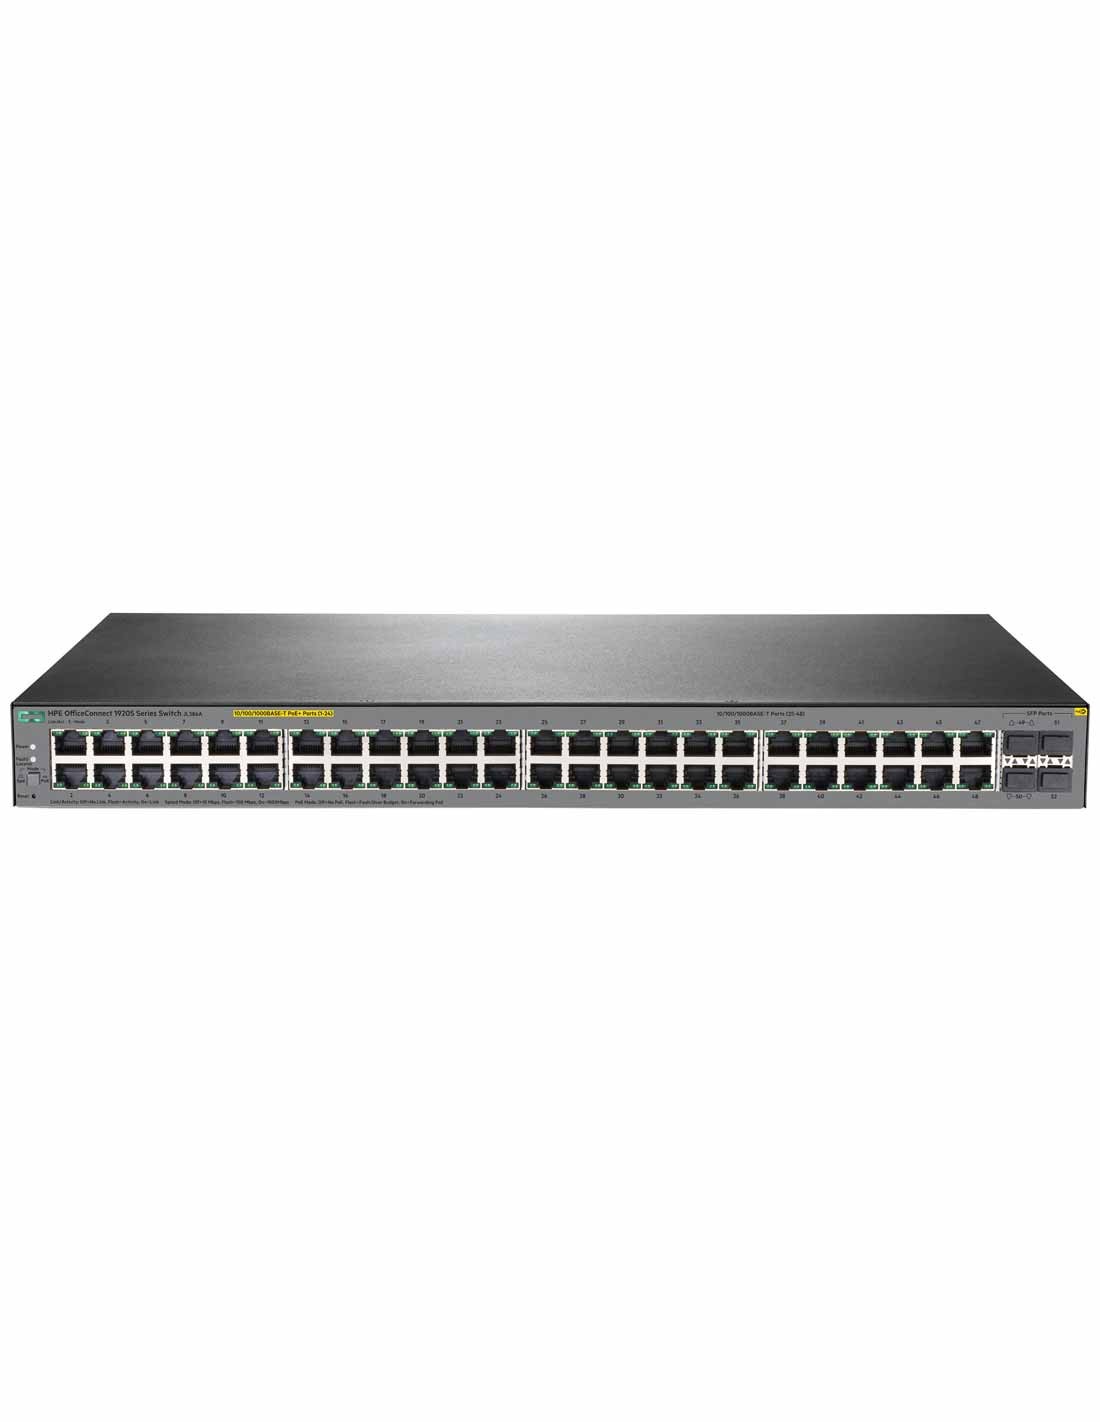 HPE 1920S 48G 4SFP PPoE+ 370W Switch (JL386A) at a cheap price and free delivery in Dubai UAE